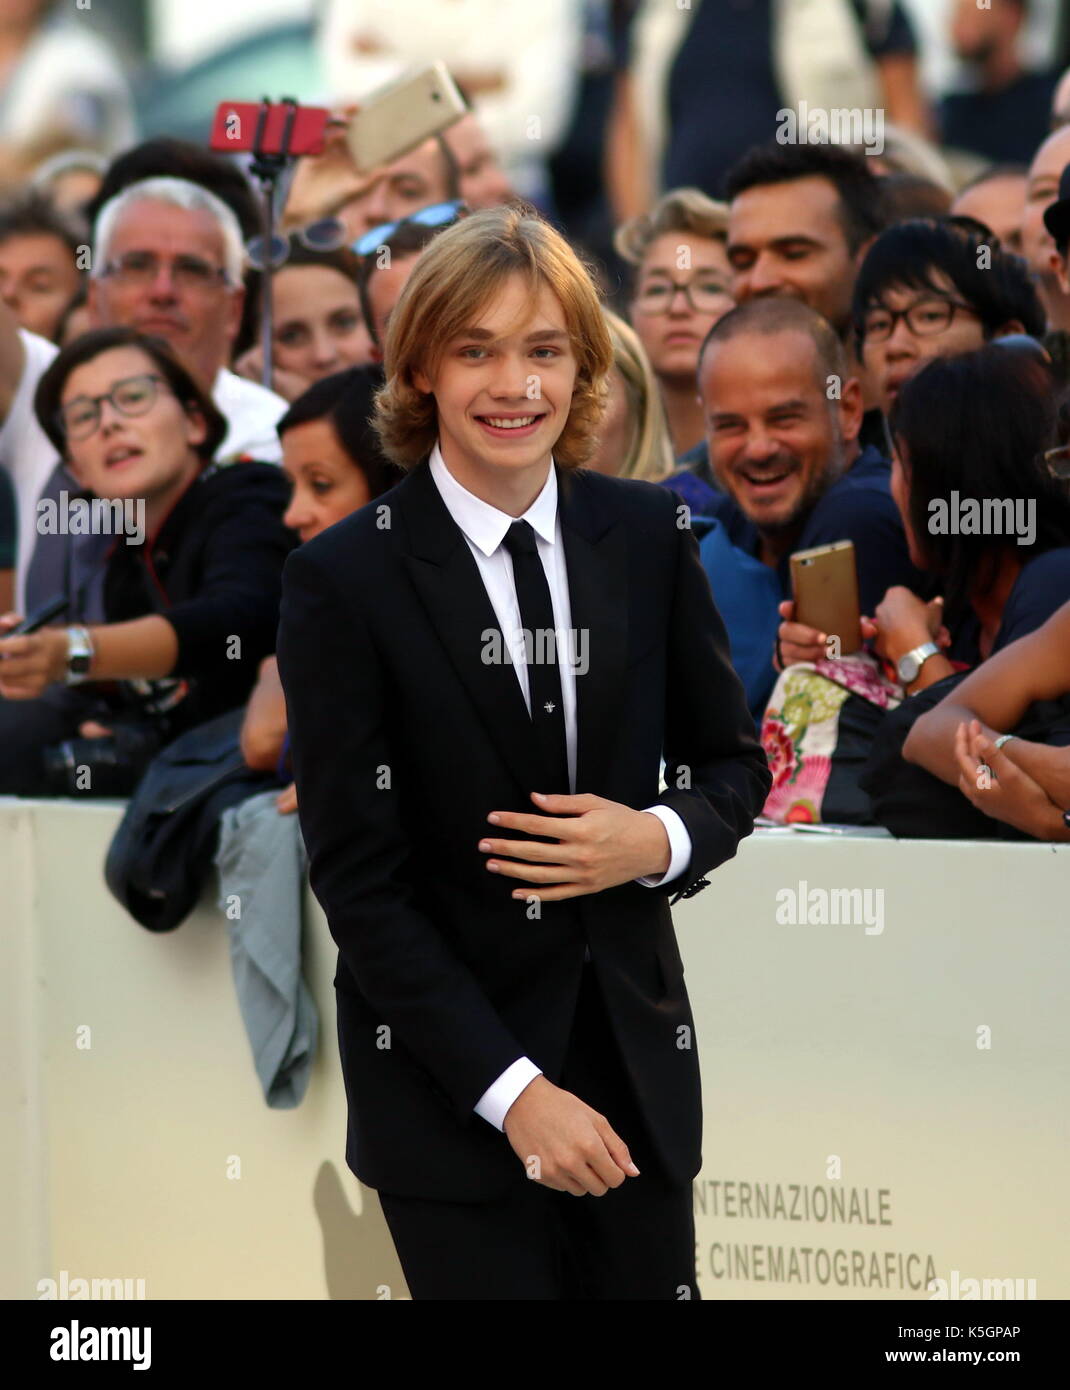 Venice, Italy. 9th September, 2017. Charlie Plummer attends at the Award Ceremony during the 74th Venice International Film Festival at Lido of Venice on 9th September, 2017. Credit: Andrea Spinelli/Alamy Live News Stock Photo